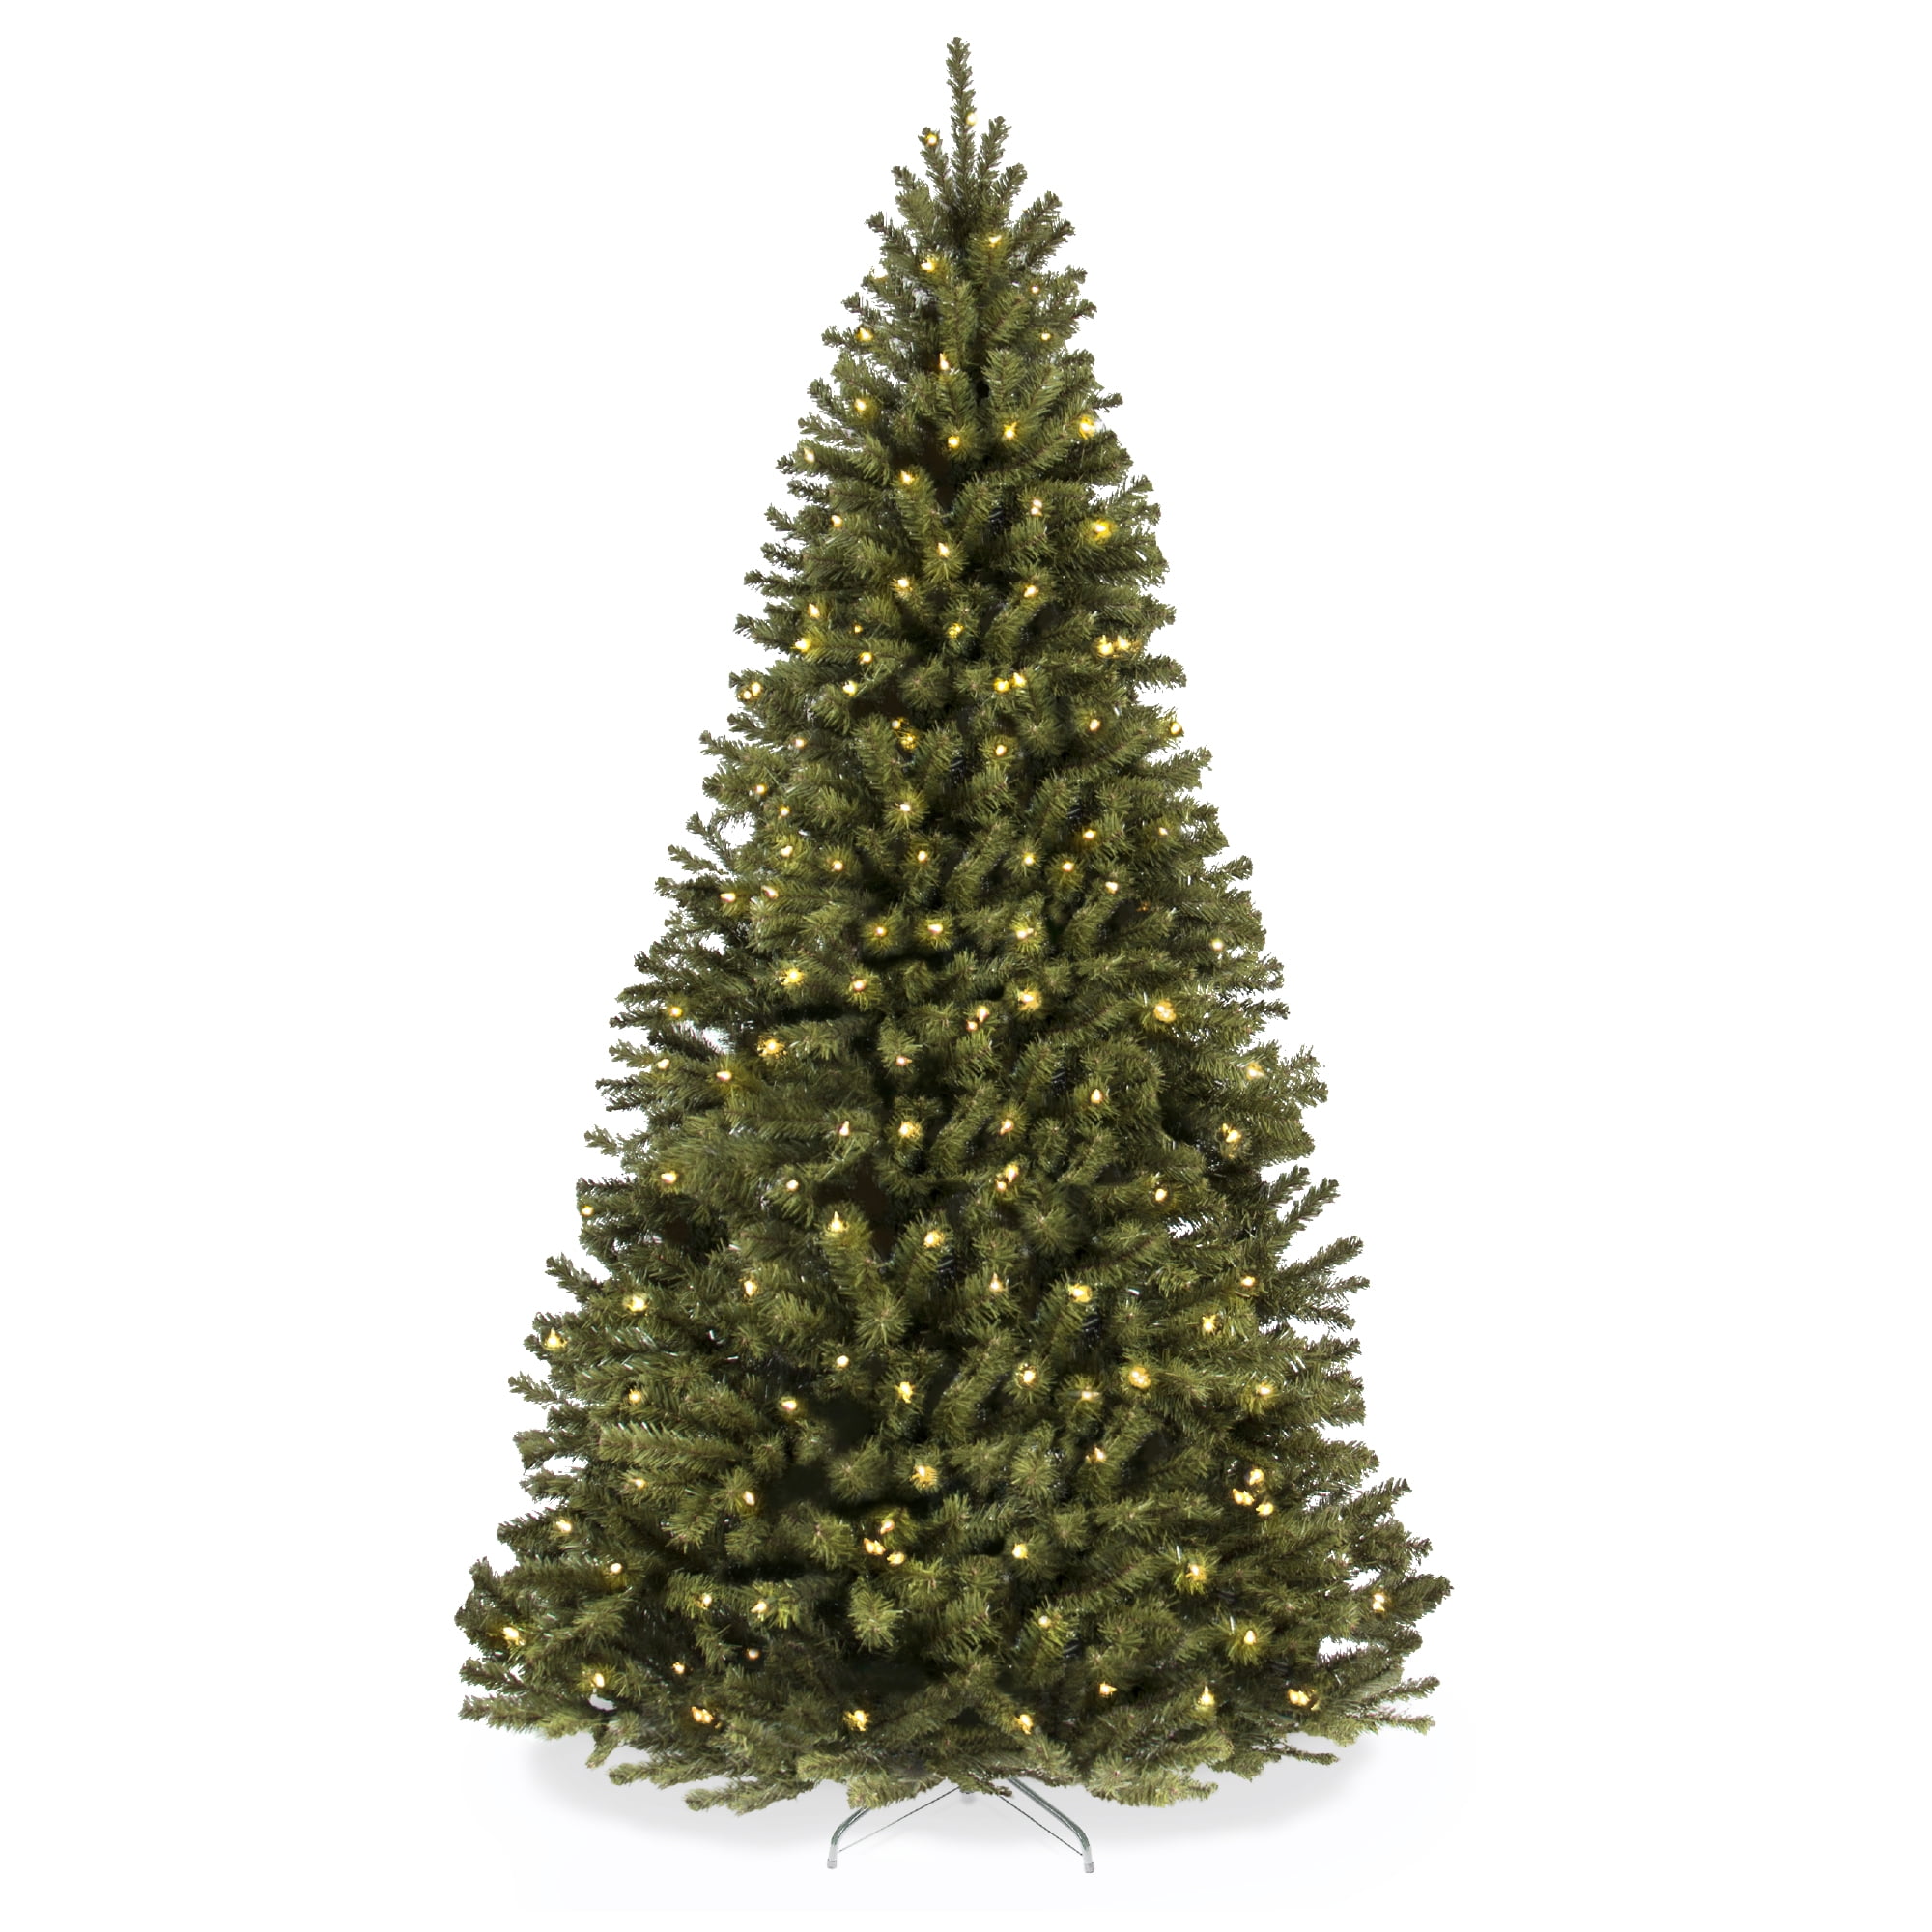 UOUNE 6ft Christmas Tree Artificial Xmas Tree Thick Bushy Pine Tree 650tips with Strong Metal Stand for Home Garden Holiday（Green）